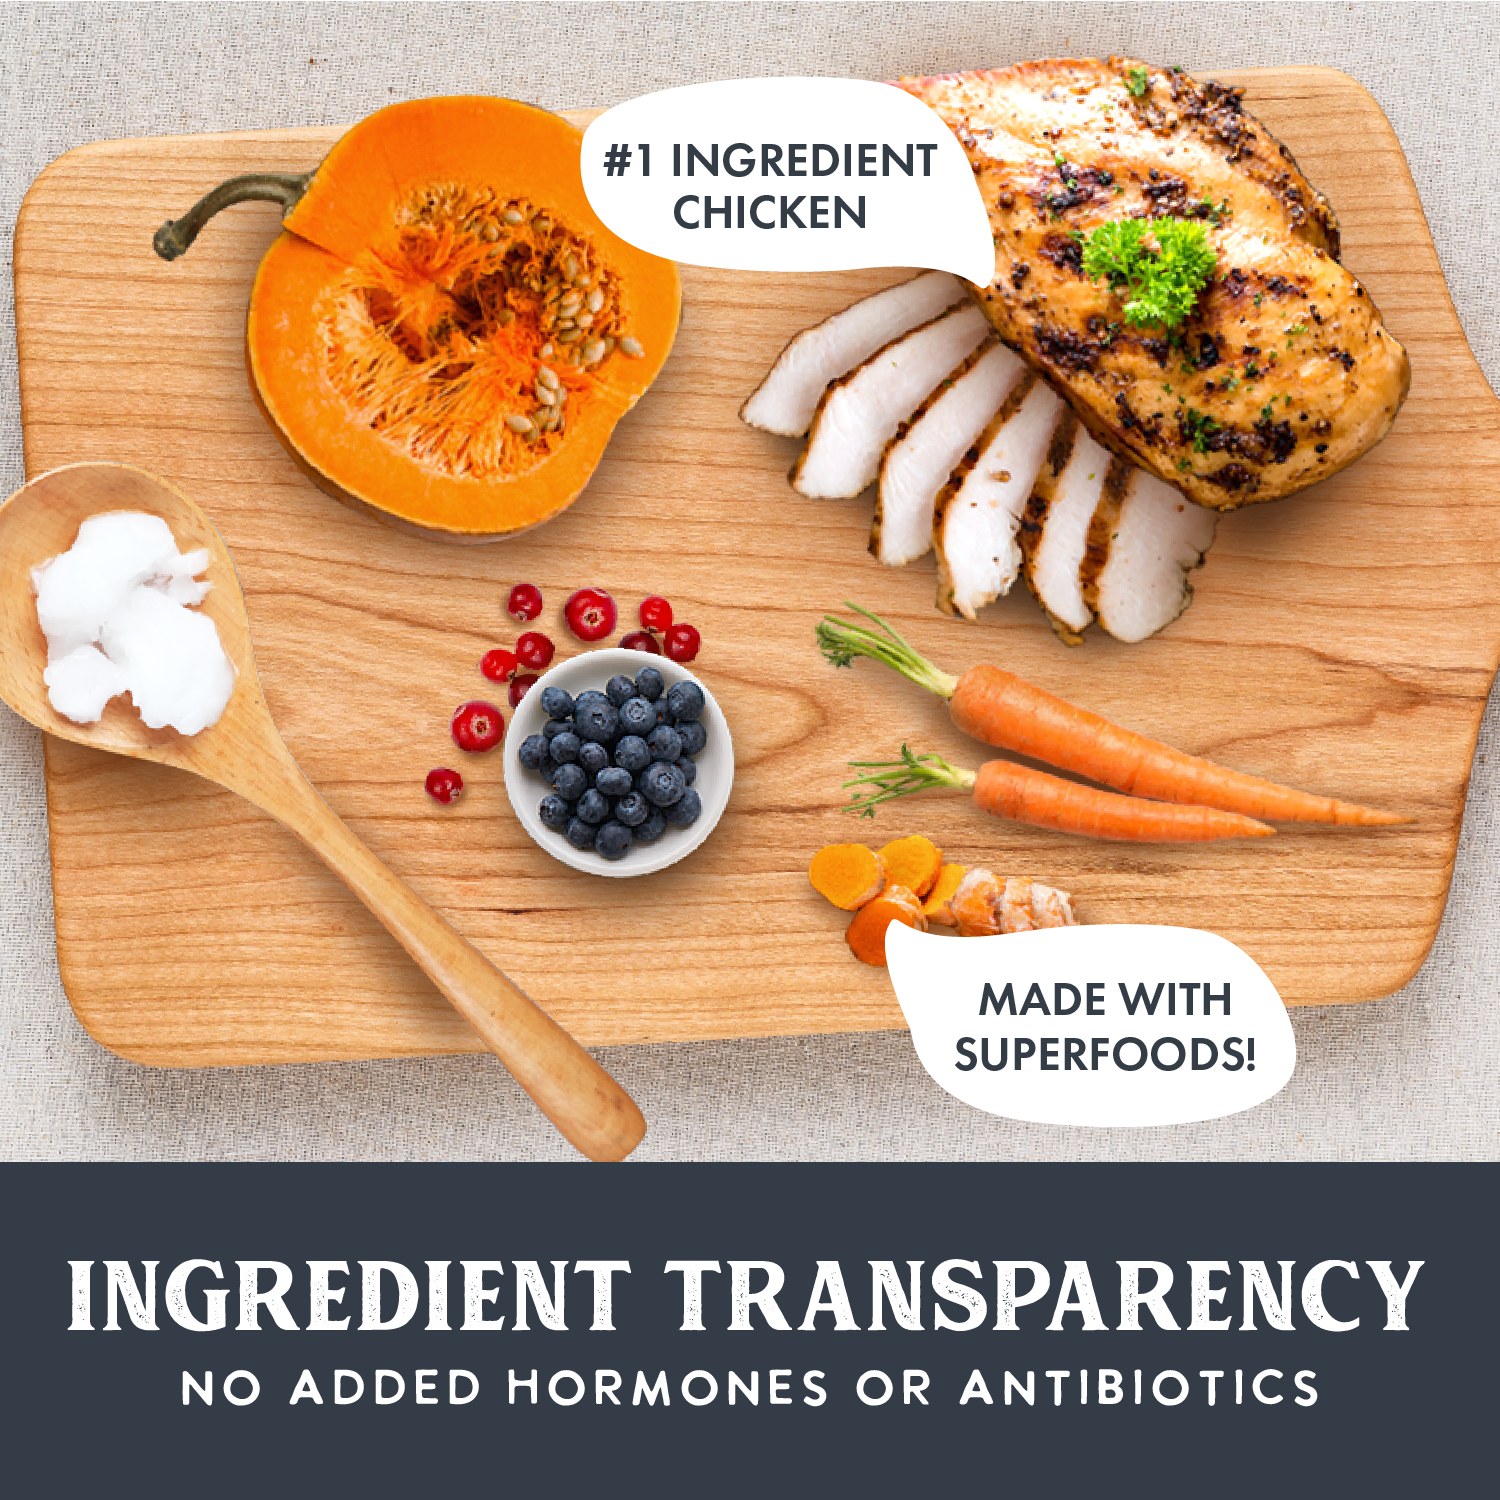 High-quality ingredients for Health Extension dog food displayed, featuring chicken as the #1 ingredient, alongside superfoods like pumpkin, carrots, coconut oil, and berries, with no added hormones or antibiotics.